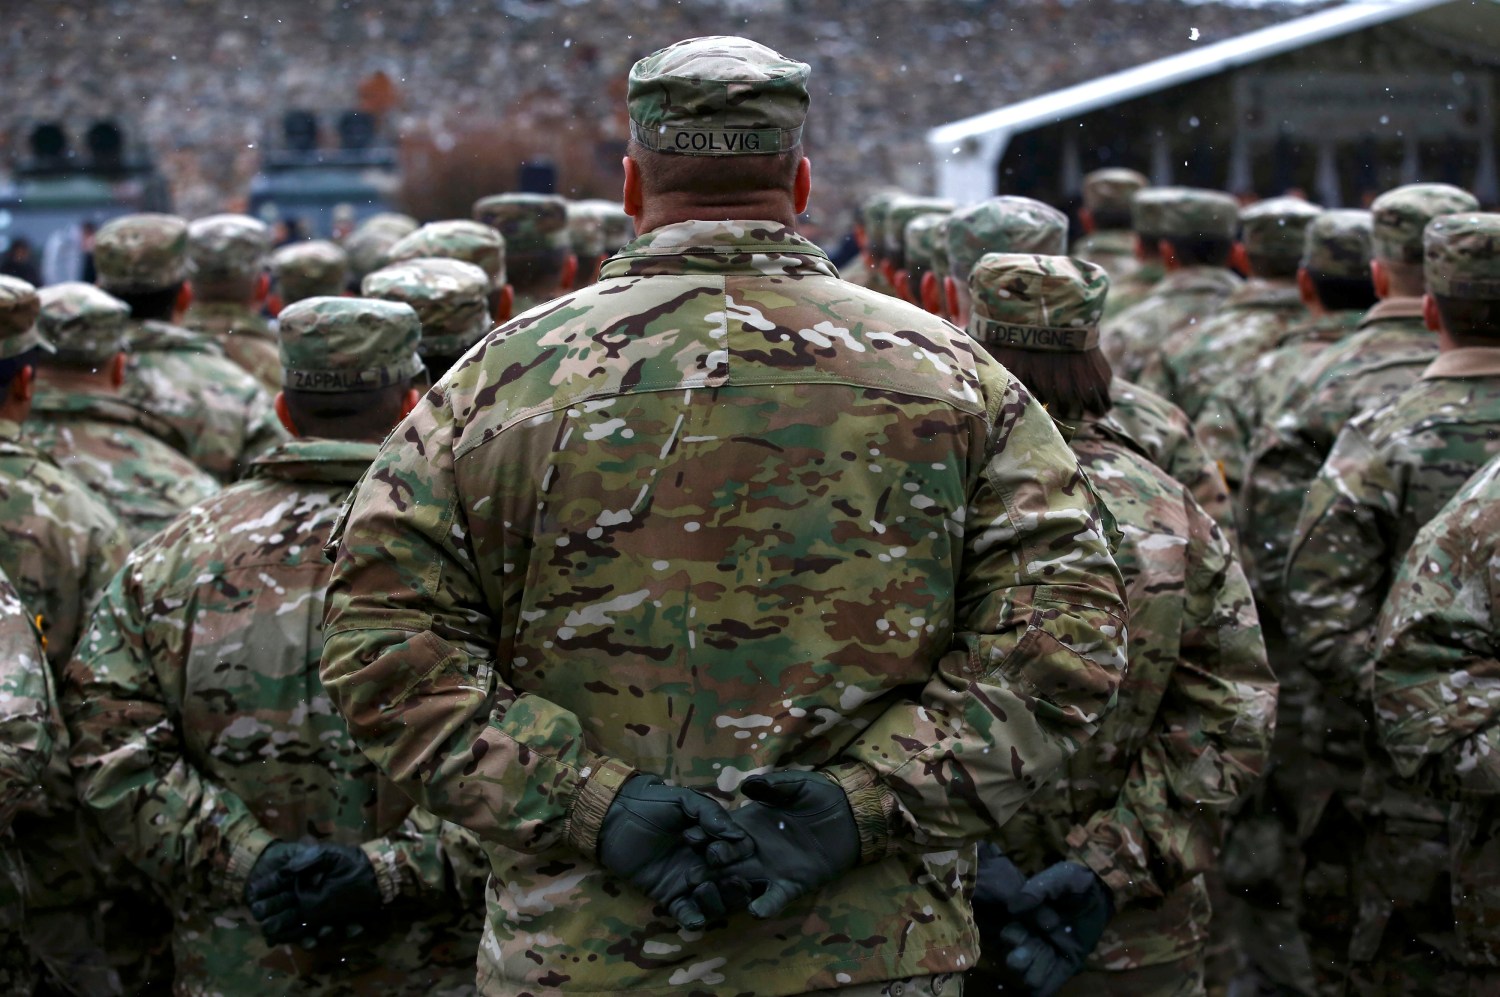 U.S. army soldiers attend an official welcoming ceremony for U.S. troops deployed to Poland as part of NATO build-up in Eastern Europe in Zagan, Poland, January 14, 2017. REUTERS/Kacper Pempel     TPX IMAGES OF THE DAY - RC182E794160